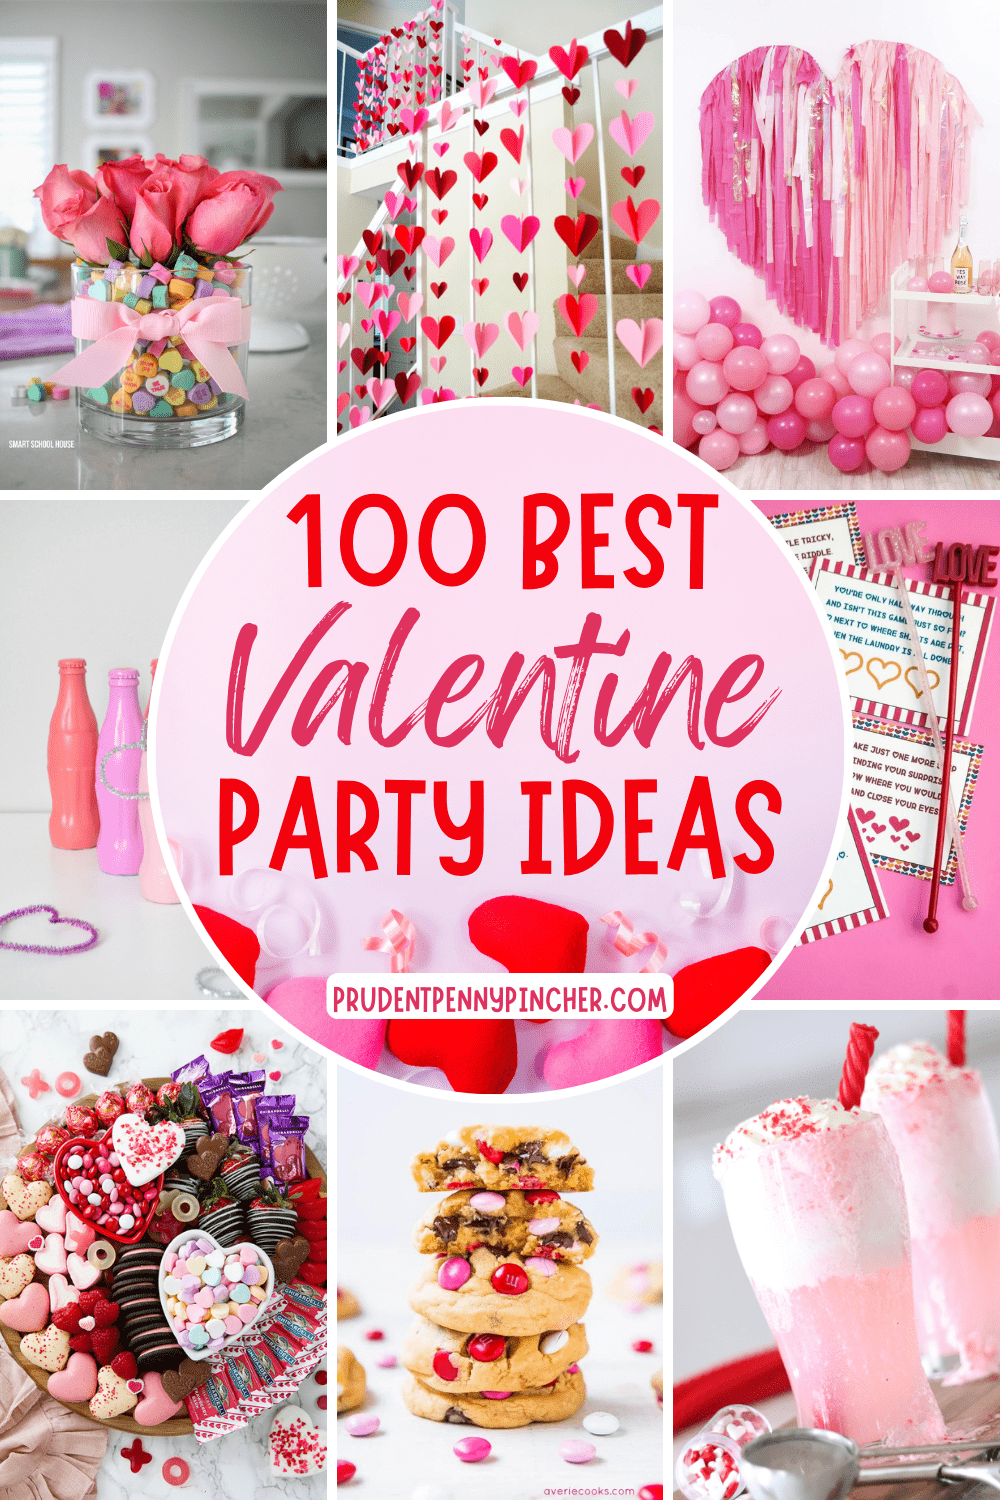 Free Printable Scratch Pad Valentines - Party Like a Cherry